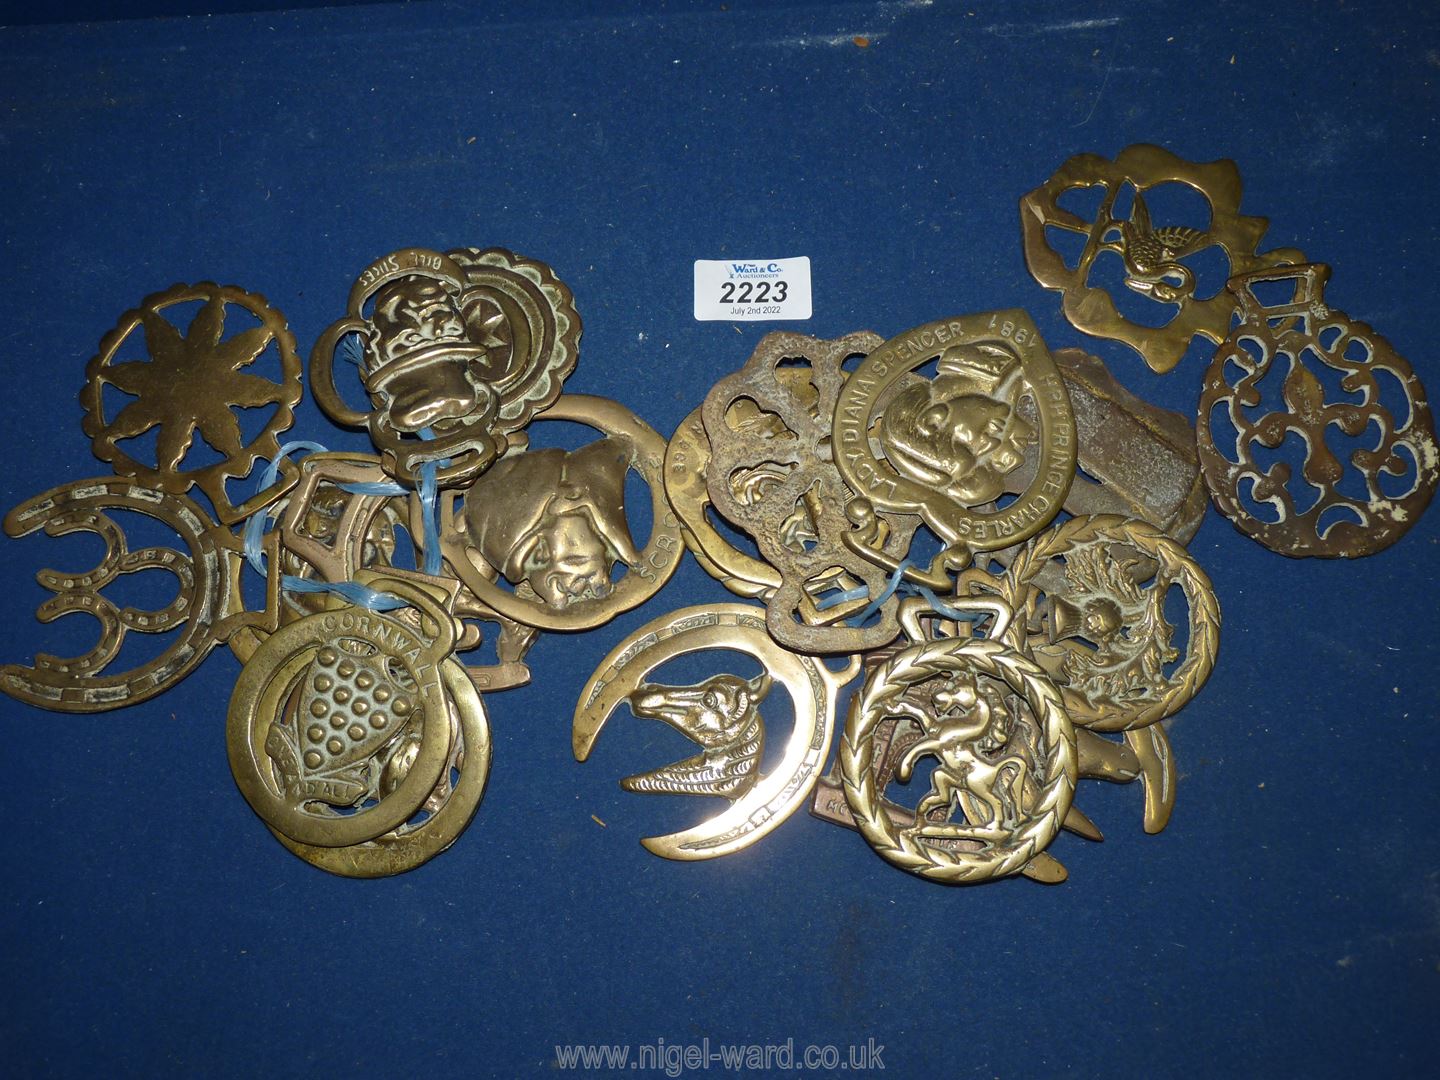 Two bundles of Horse brasses and two loose including Bill Sikes, Llangollen, Stars, Horseshoes etc.